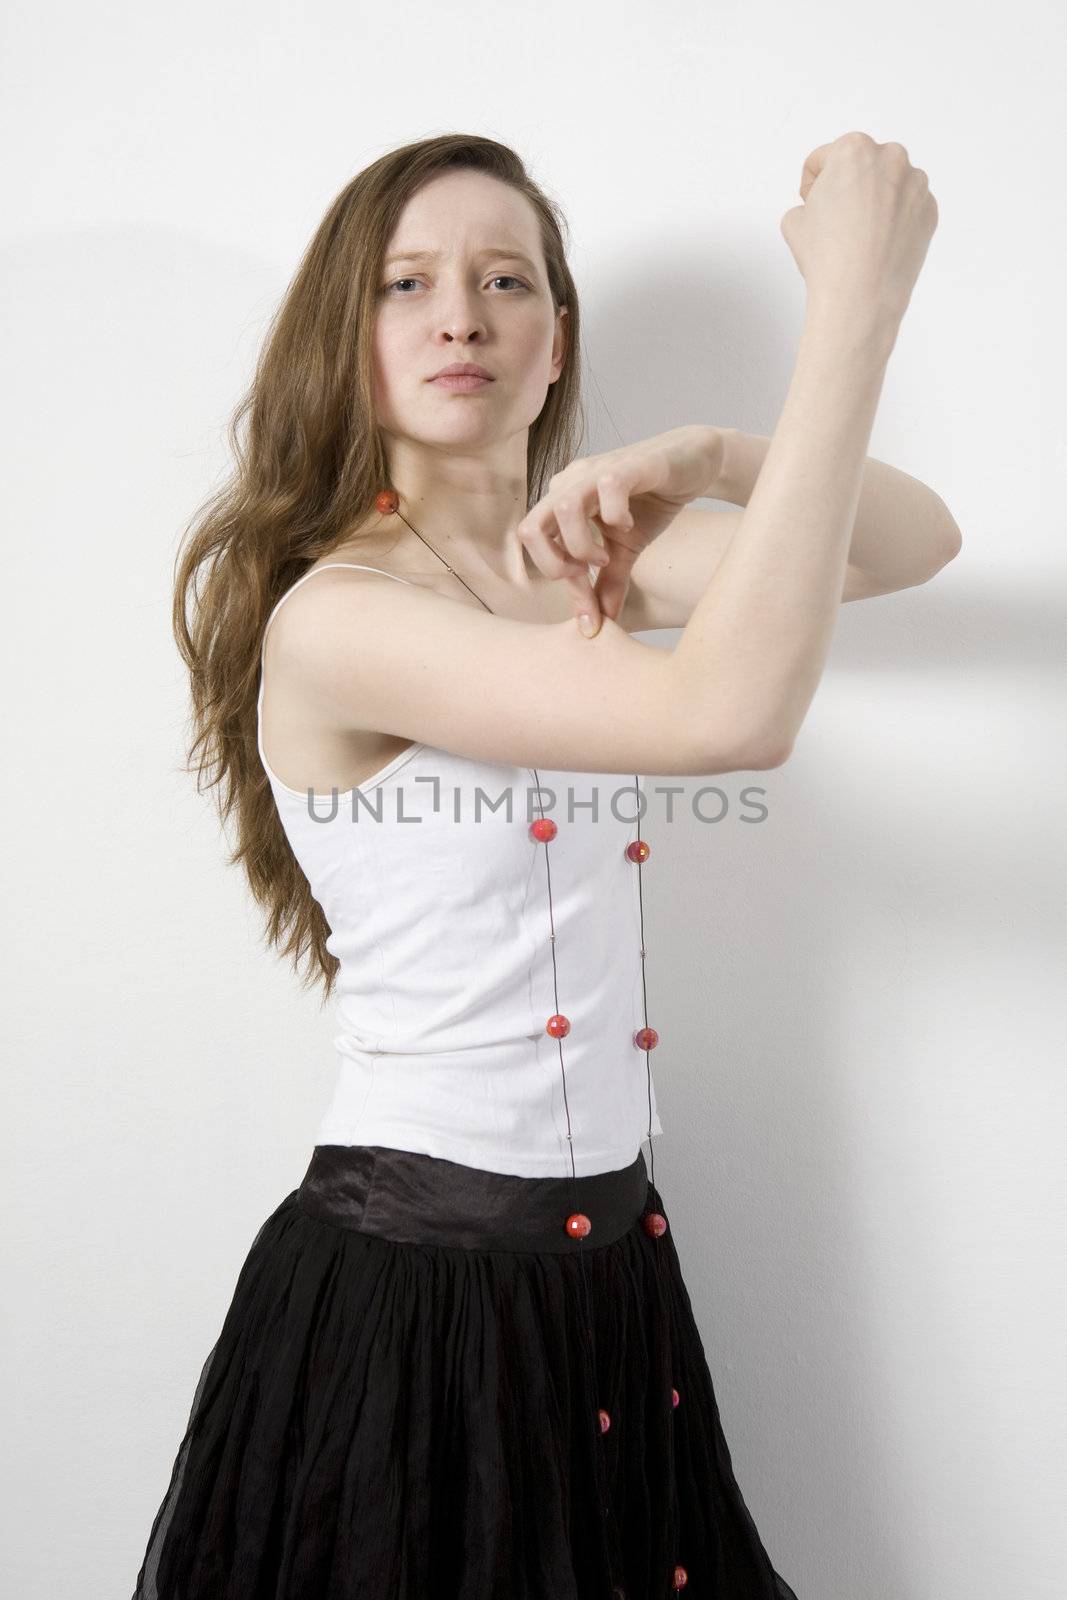 angry woman with beads showing her biceps. isolated on white

